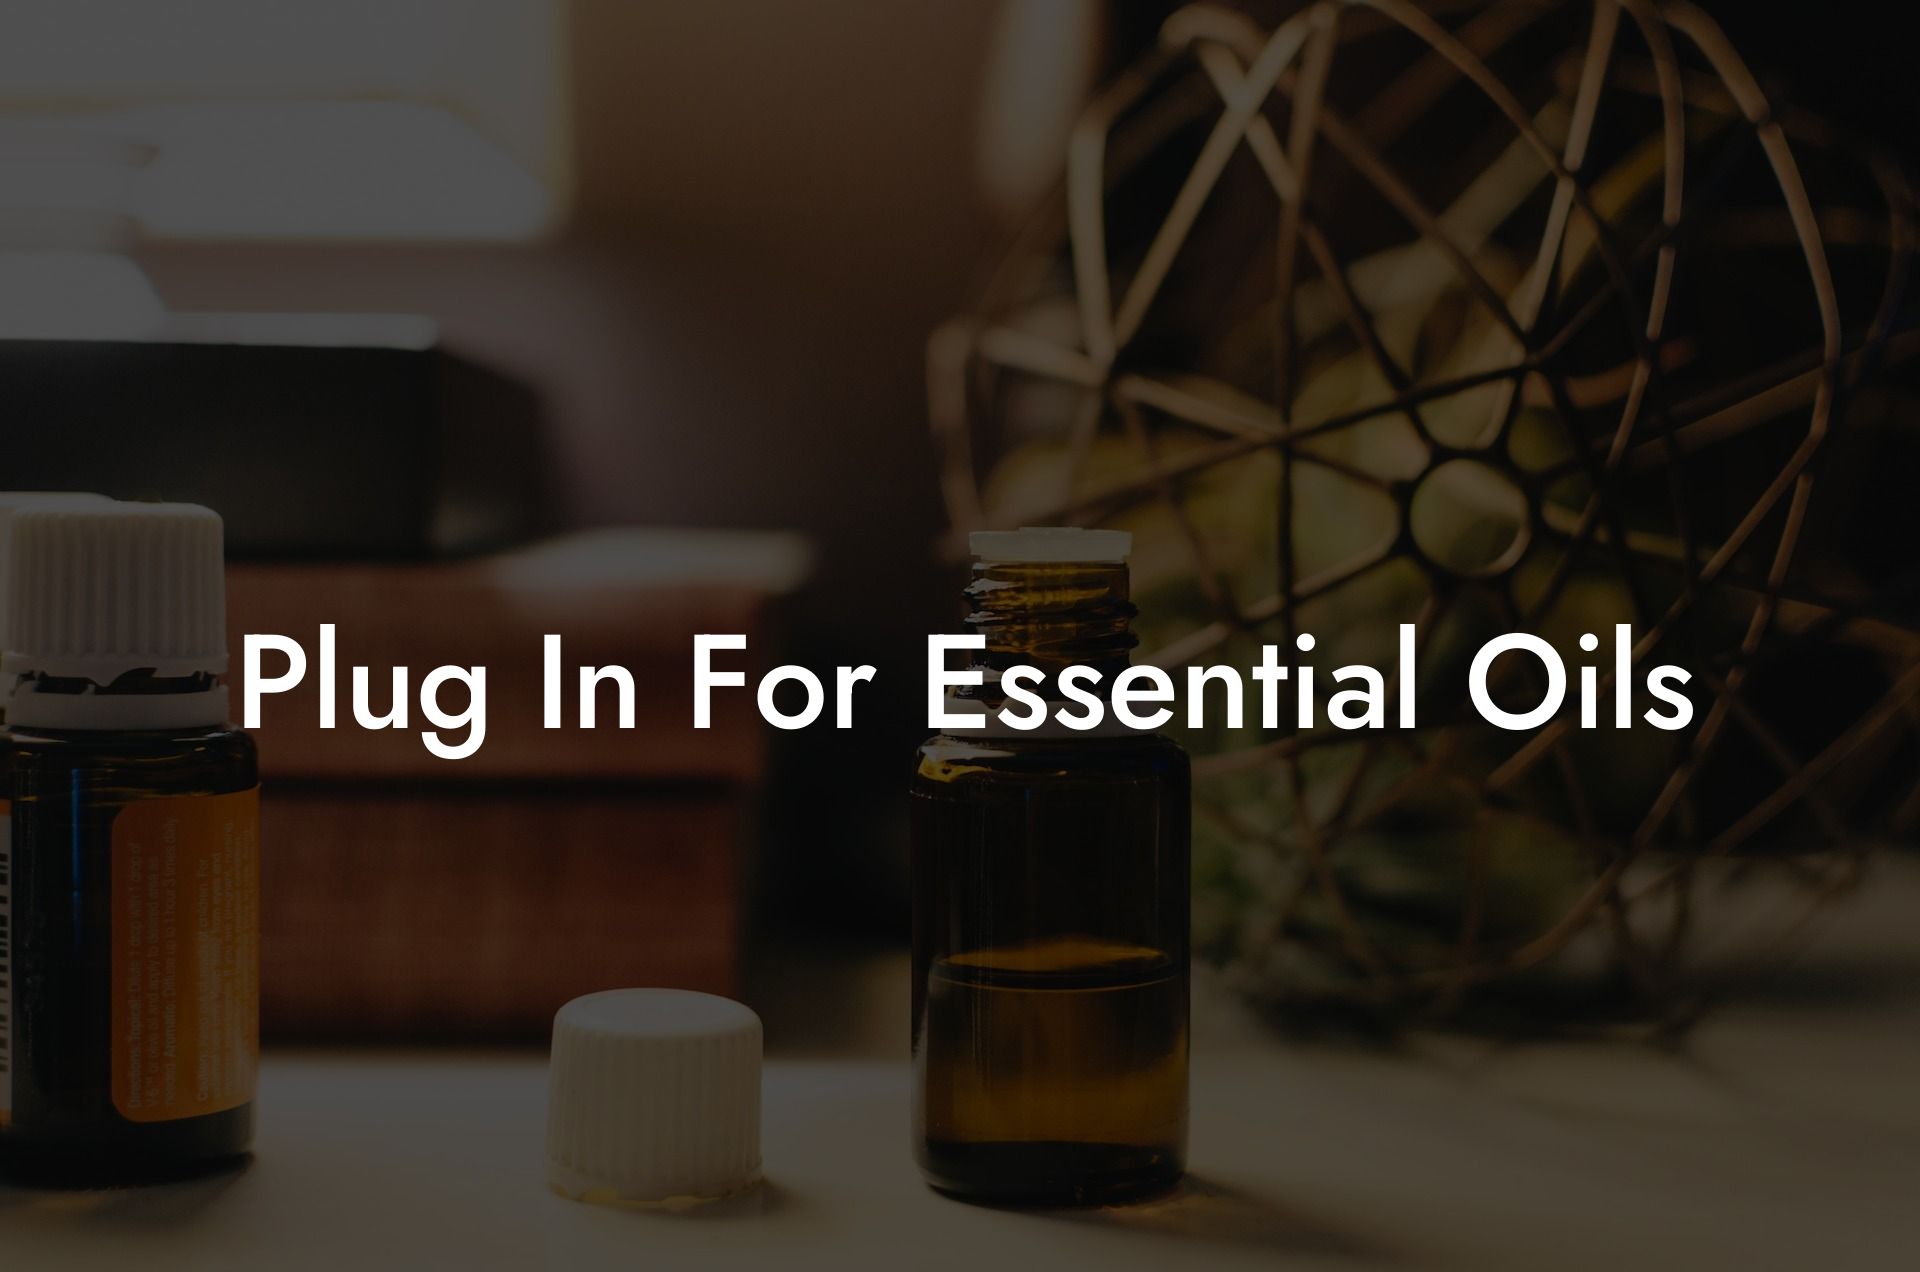 Plug In For Essential Oils